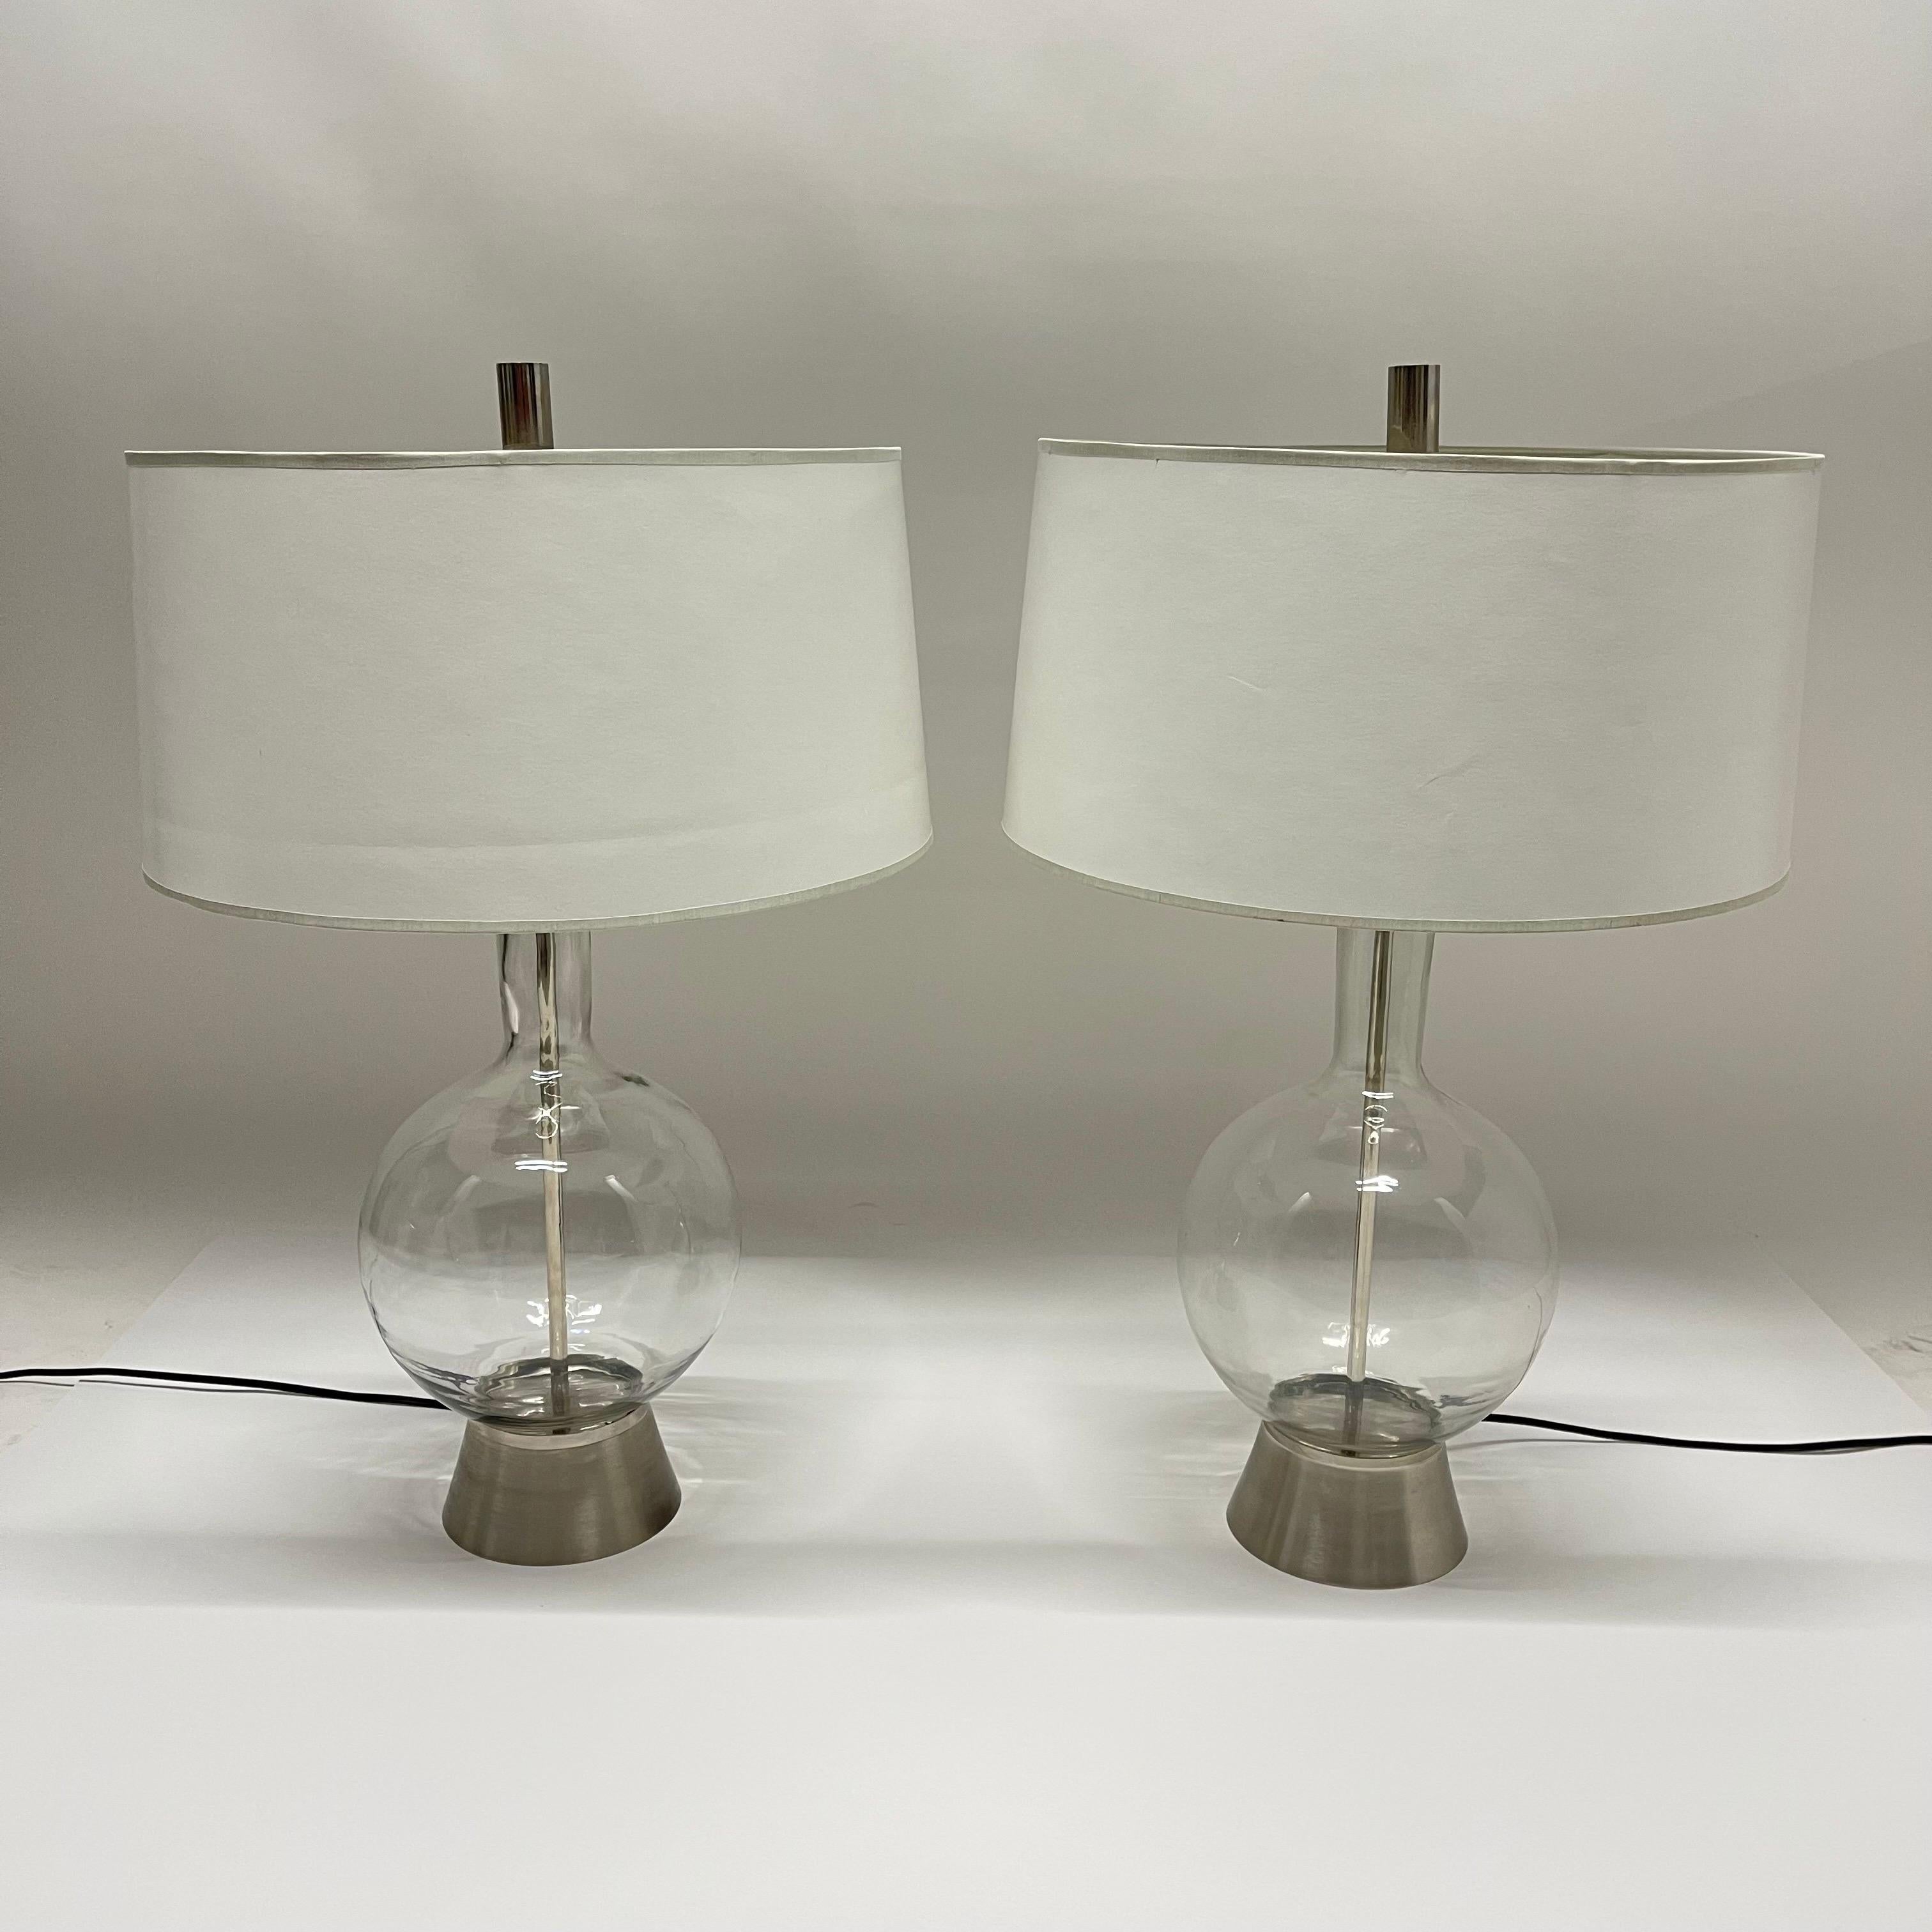 Pair of exquisite mid-century blown glass table lamps, rendered in clear mouth blown glass with brushed nickel bases and nickel sockets, harps, and finials.

Dimensions:
10